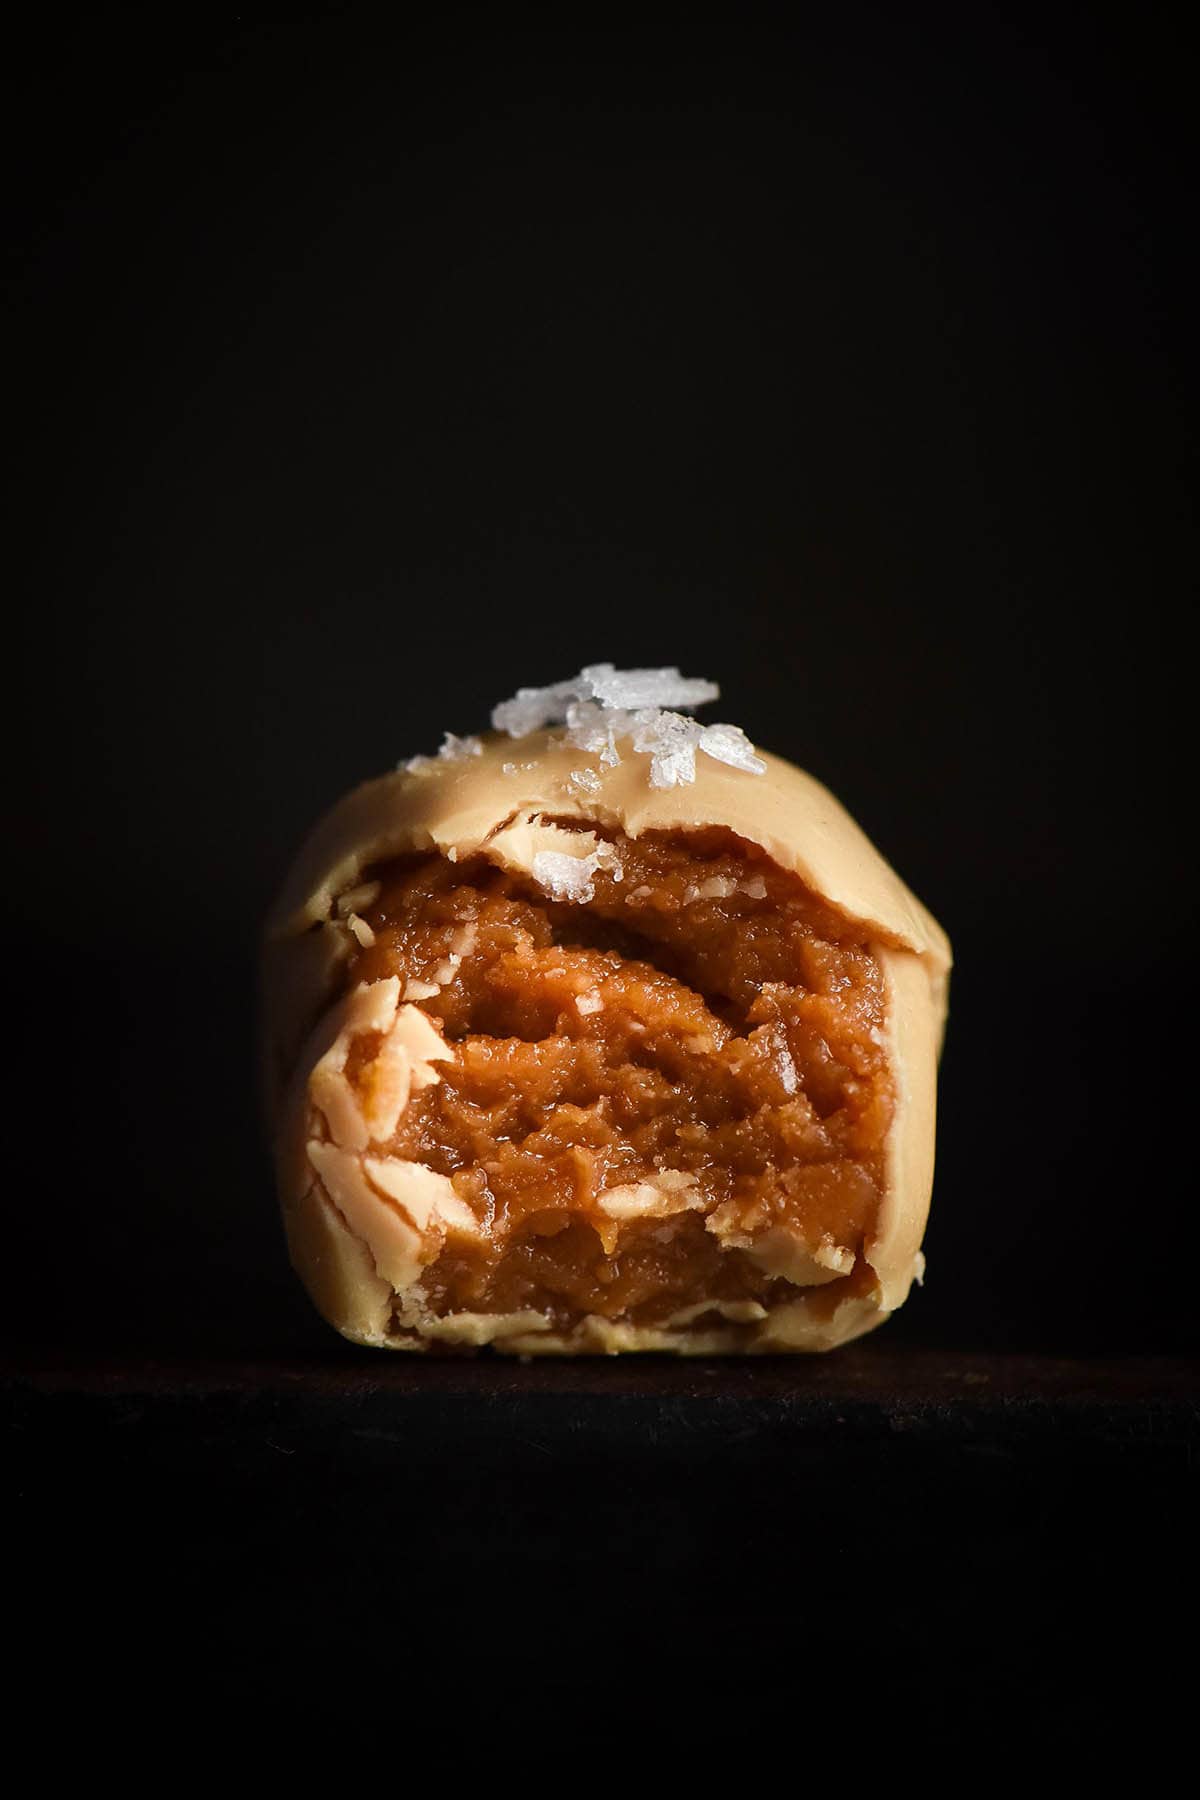 A close up side on image of a peanut butter truffle coated in white chocolate. A bite has been taken, revealing the peanut butter centre, and sea salt flakes adorn the top. The truffle sits atop a black surface against a black backdrop